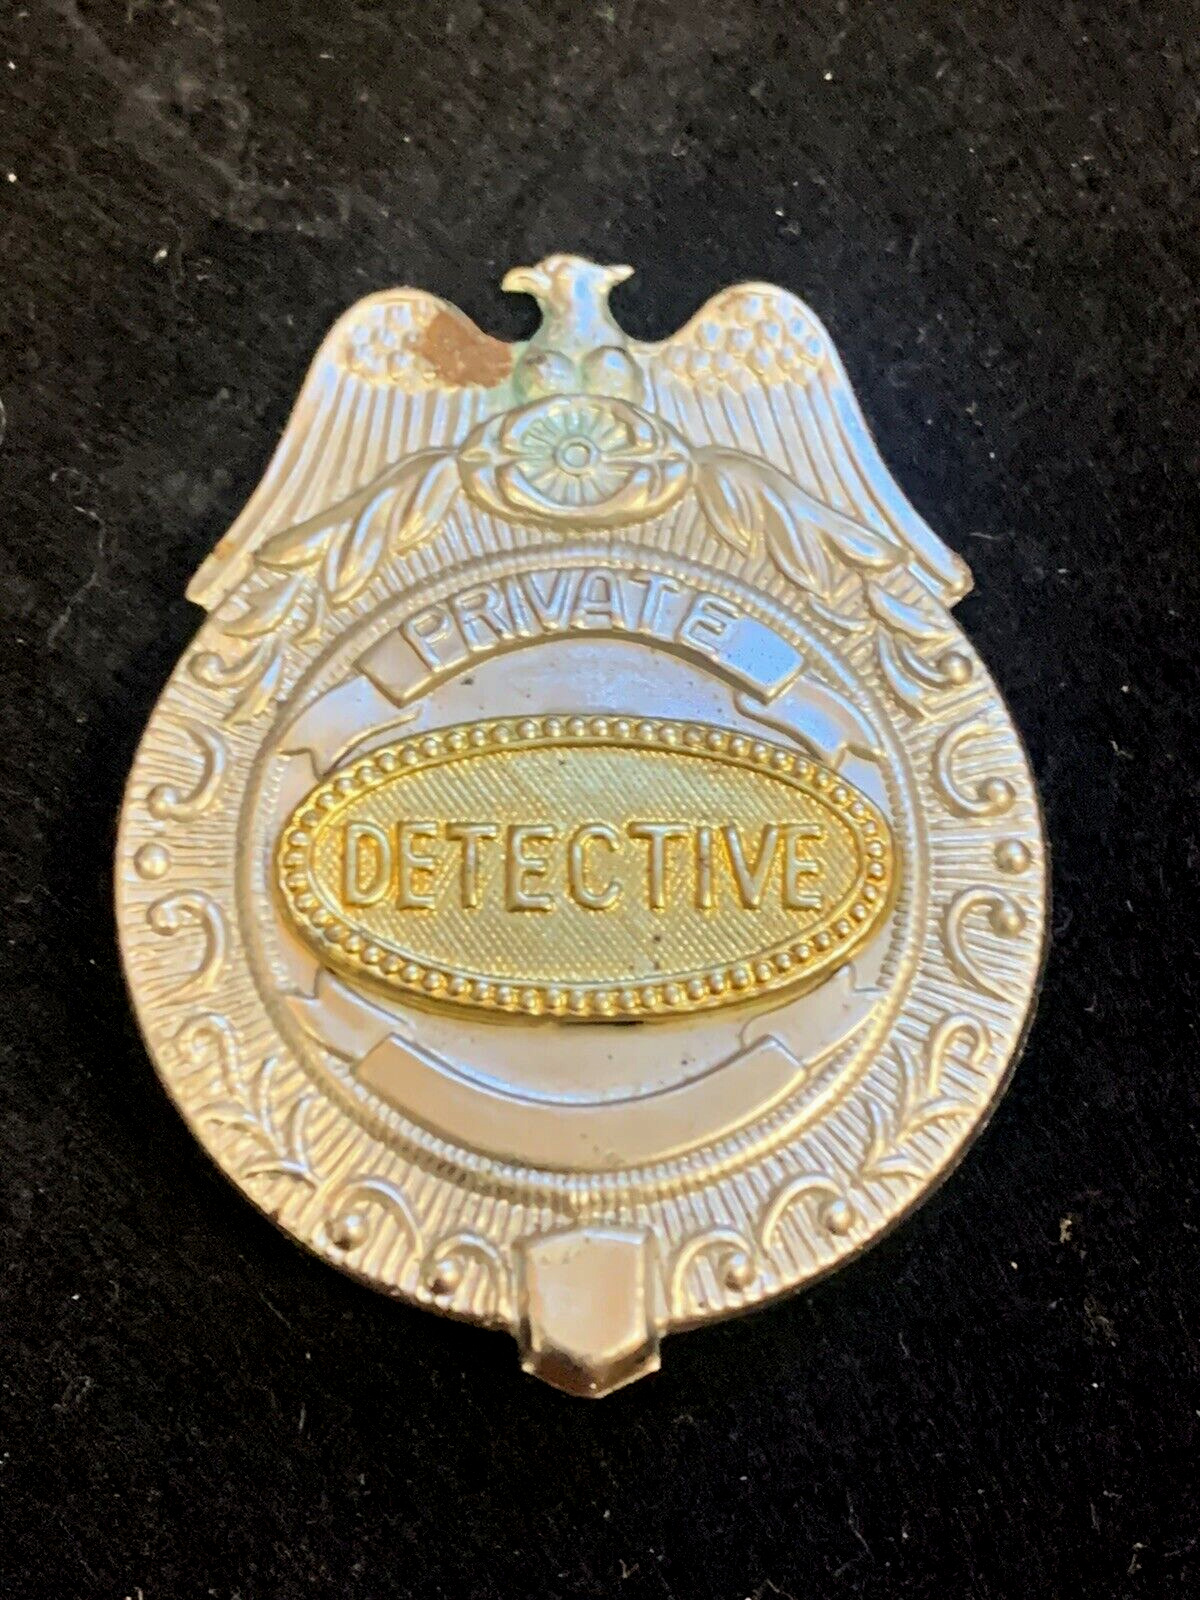 VINTAGE OBSOLETE PRIVATE DETECTIVE TIN BADGE FROM SOUTHERN IOWA (17B)